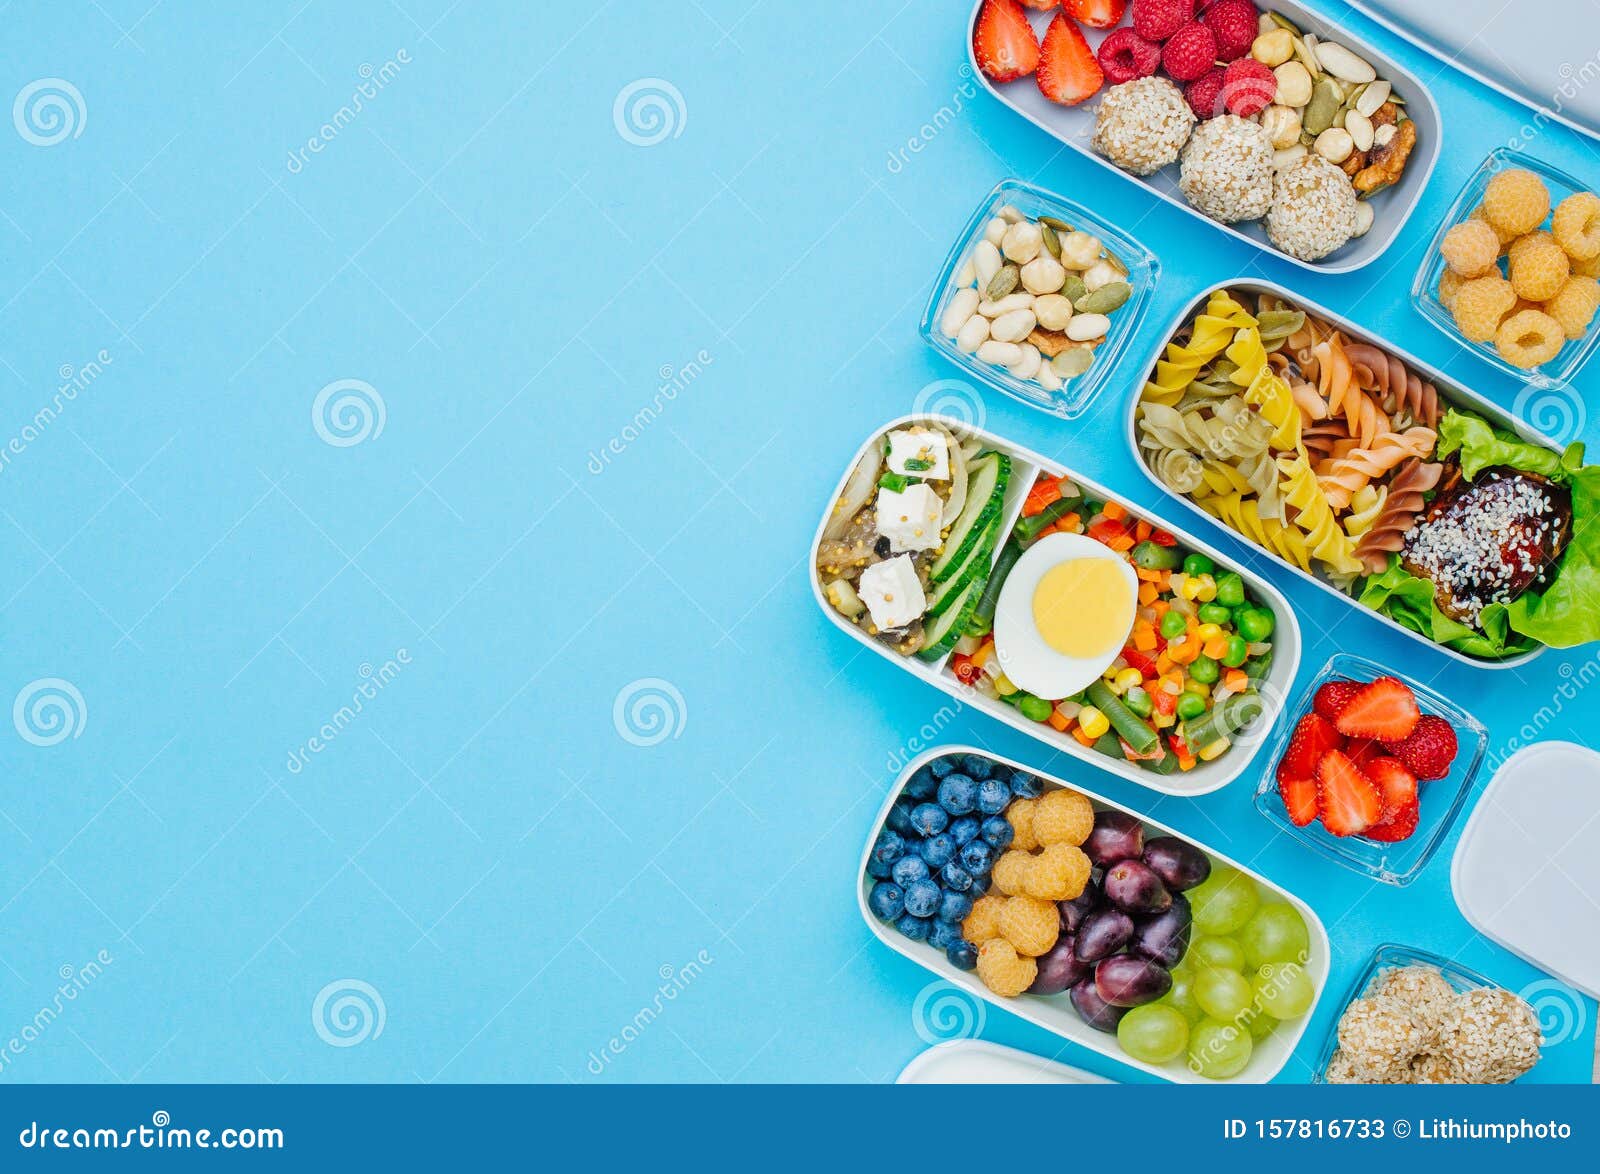 https://thumbs.dreamstime.com/z/plastic-lunch-boxes-filled-healthy-food-blue-background-copy-space-pattern-fresh-fruits-berries-blank-text-top-157816733.jpg